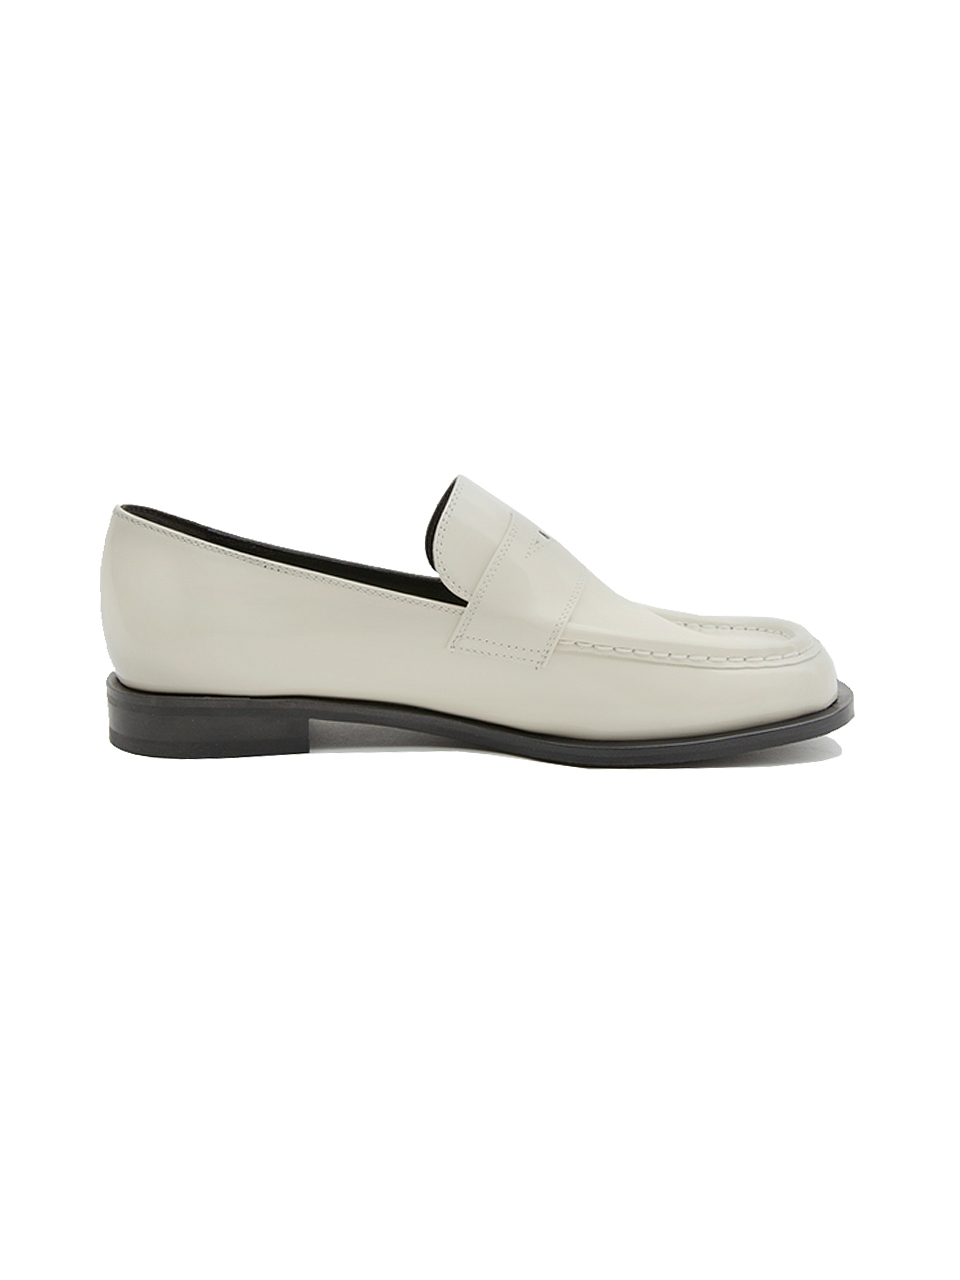 PENNY LOAFER-cream